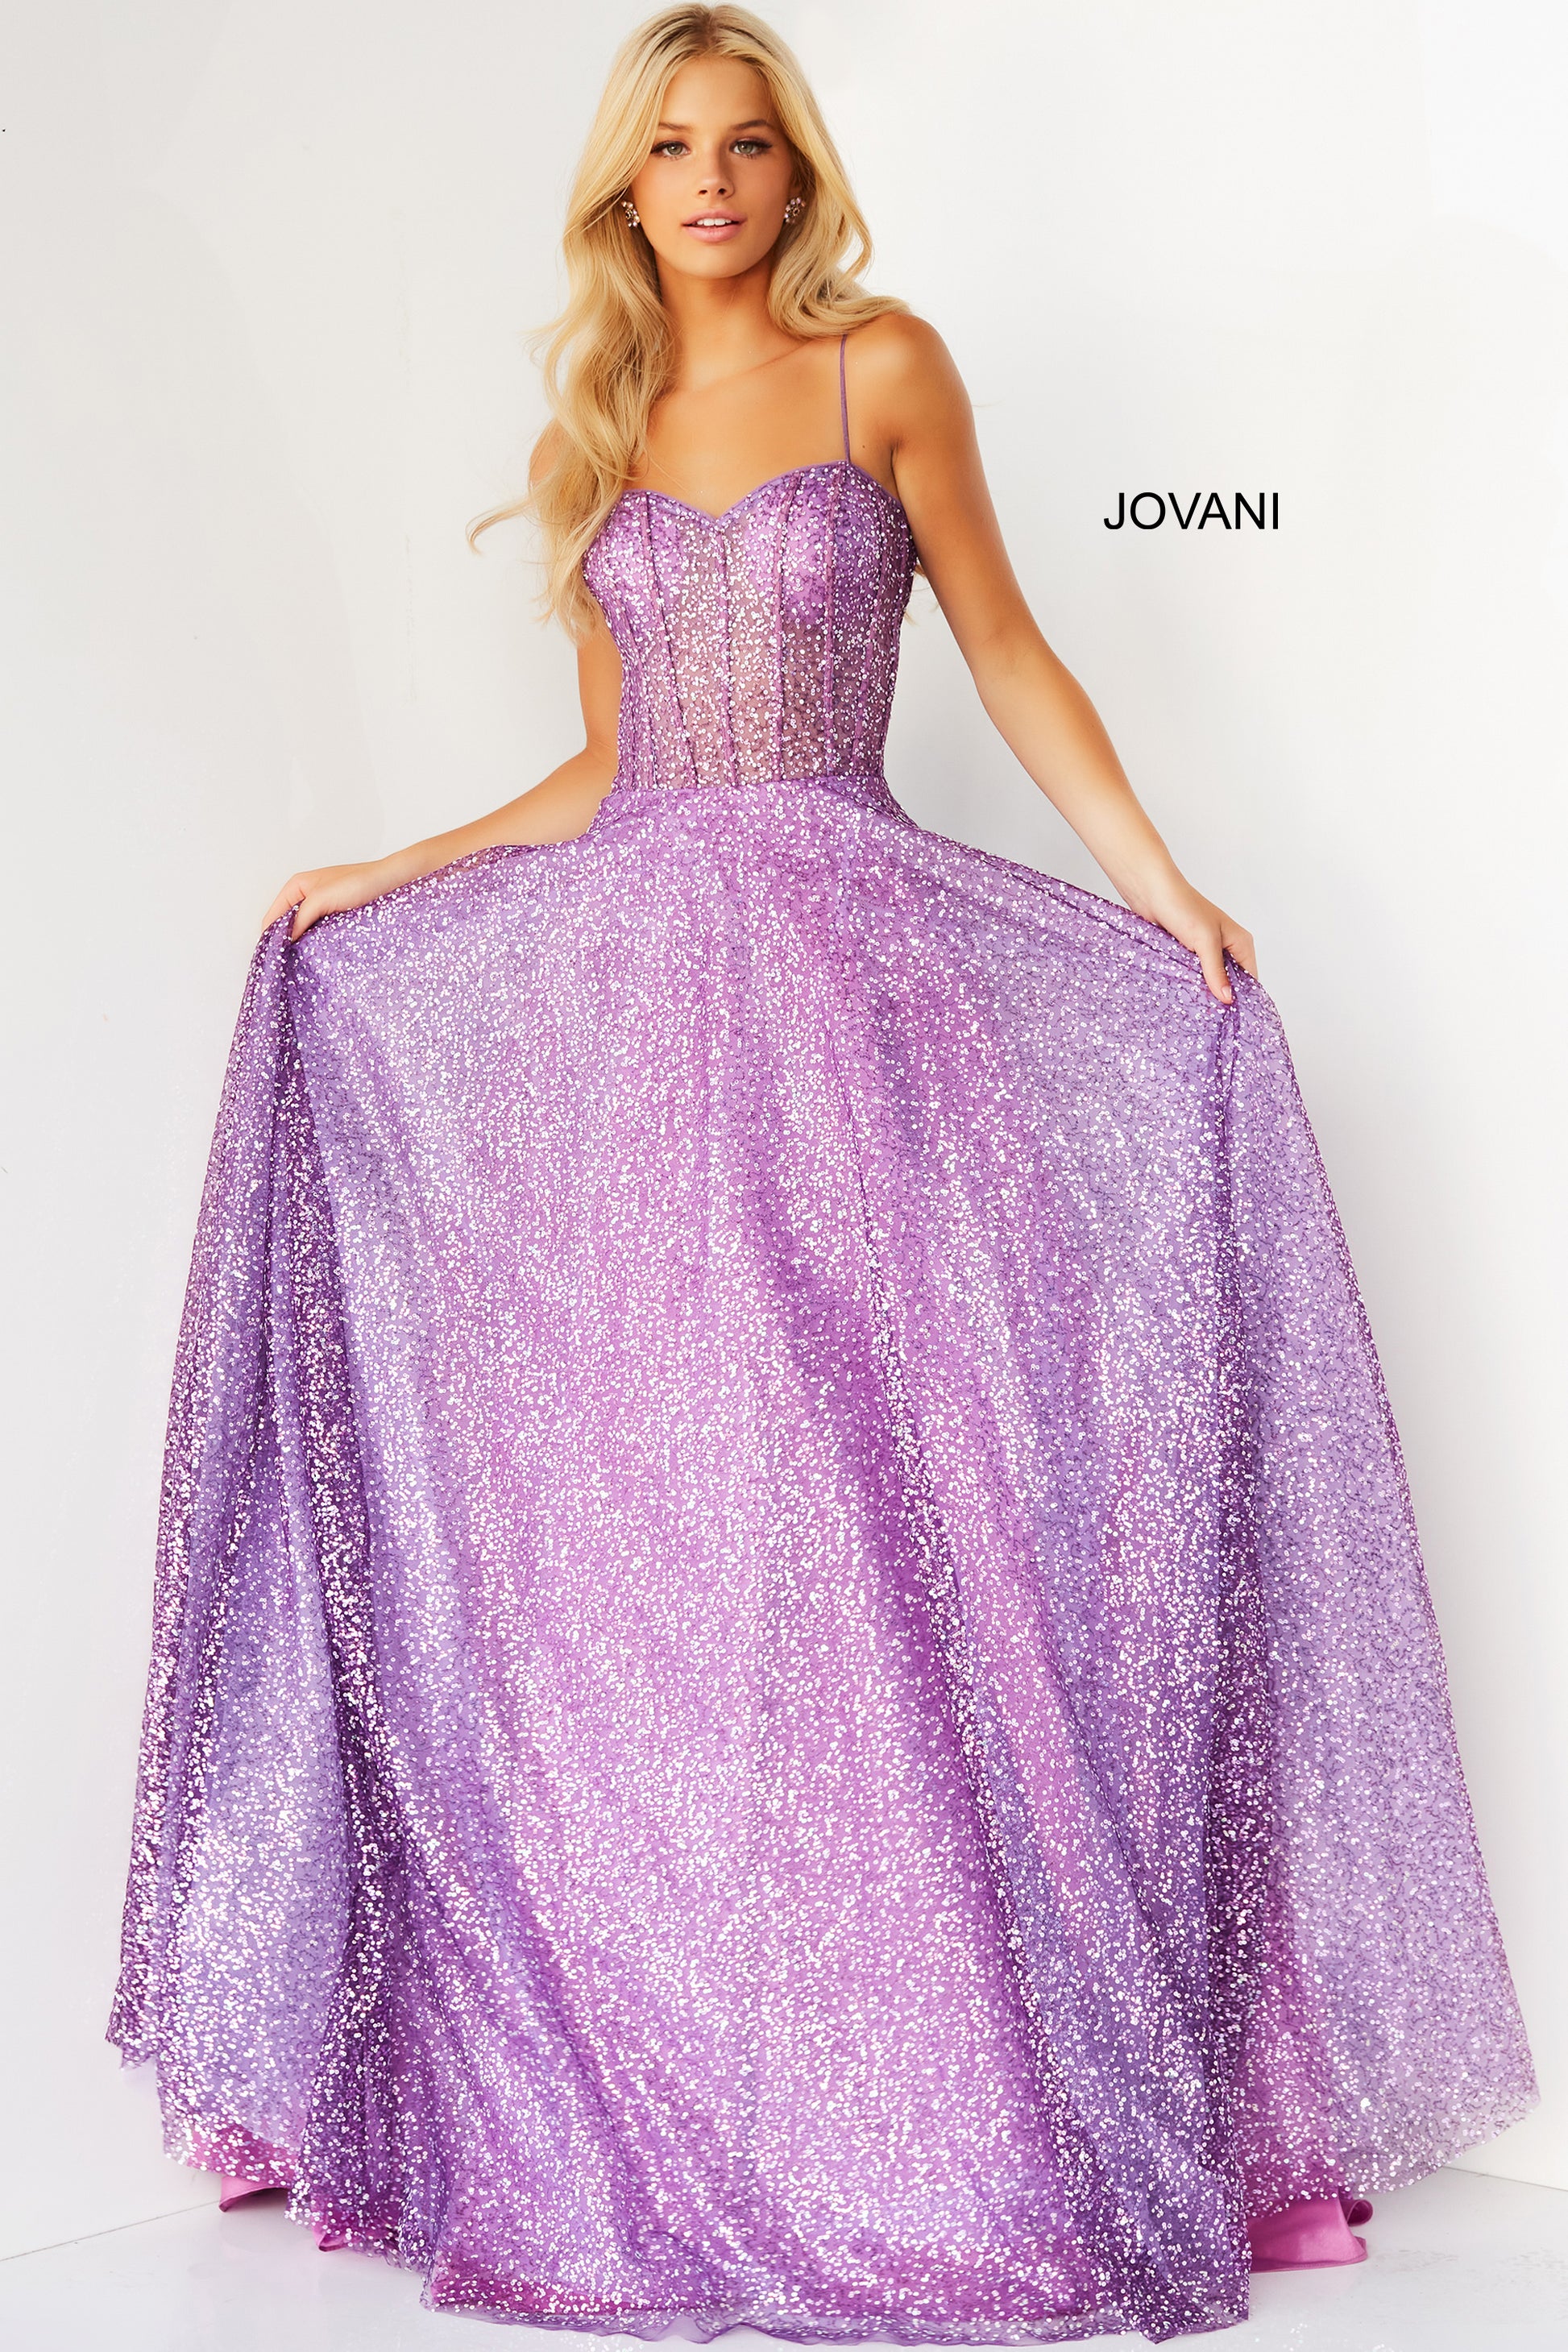 Jovani 07423 Long Ballgown Prom Pageant Gown.  This Jovani purple prom ballgown is styled in sequin net, featuring a sheer corset bodice with a sweetheart neckline, spaghetti straps.